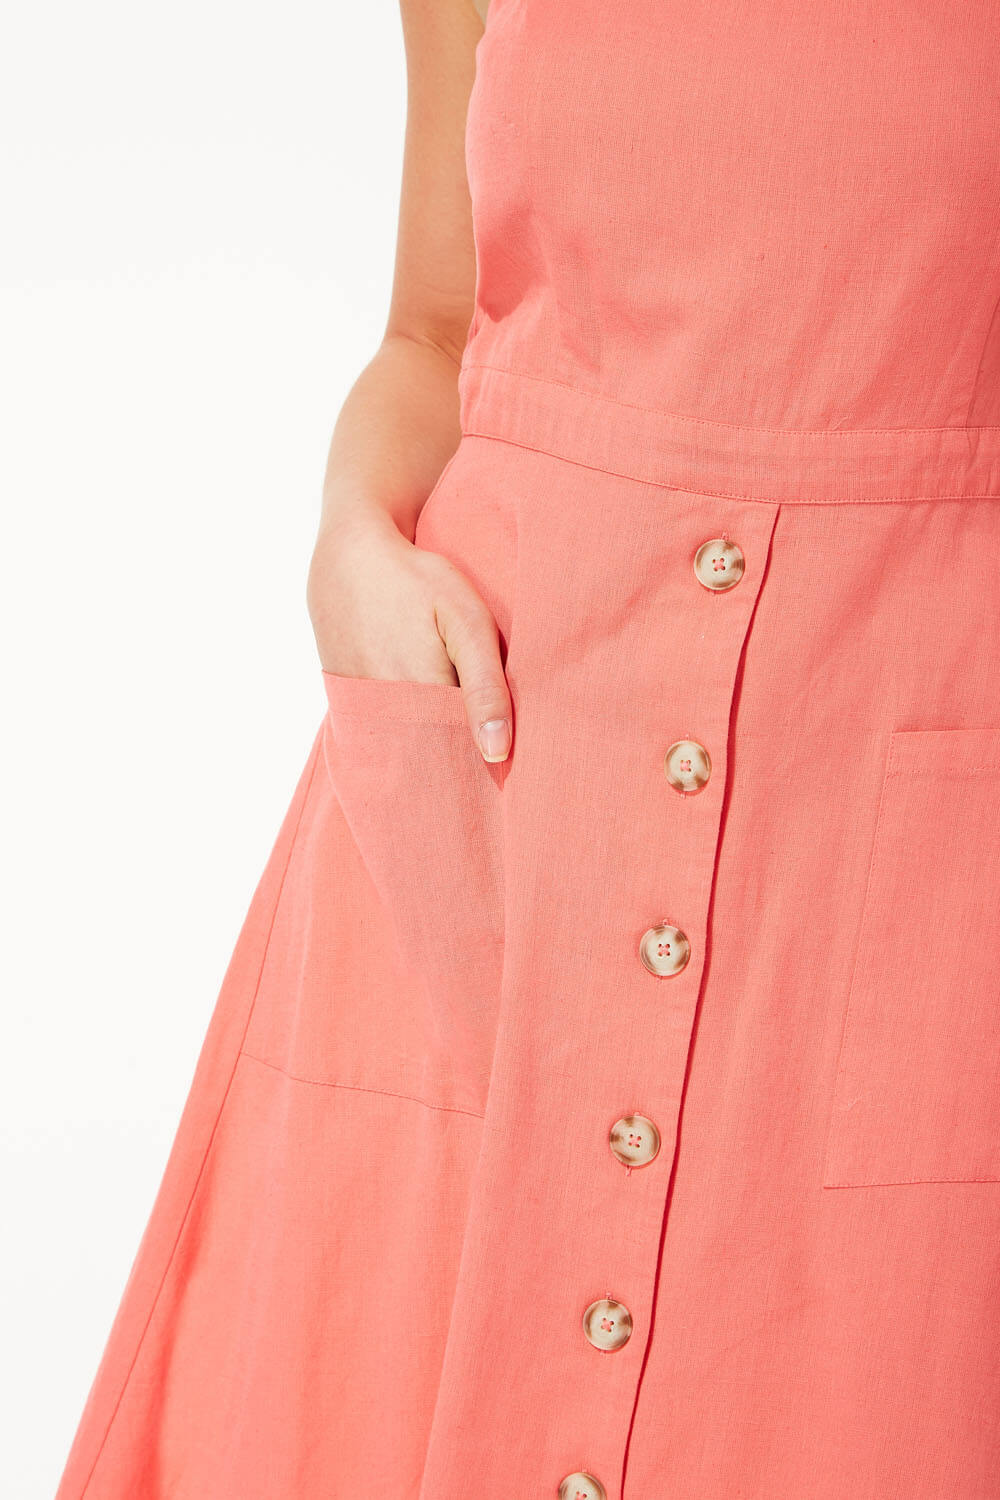 CORAL Fit and Flare Button Dress, Image 4 of 5